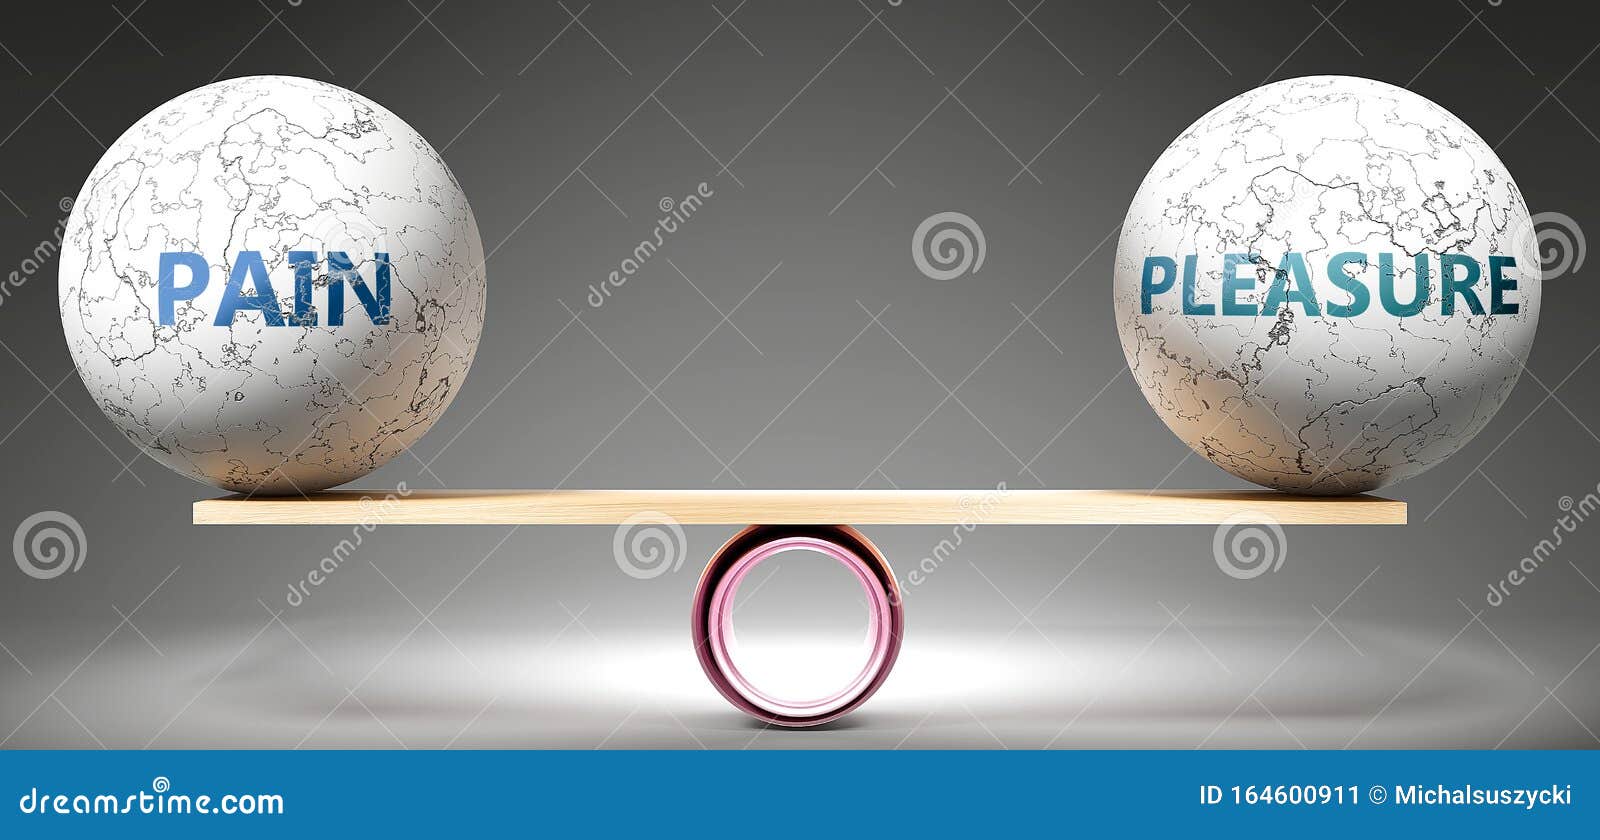 pain and pleasure in balance - pictured as balanced balls on scale that ize harmony and equity between pain and pleasure